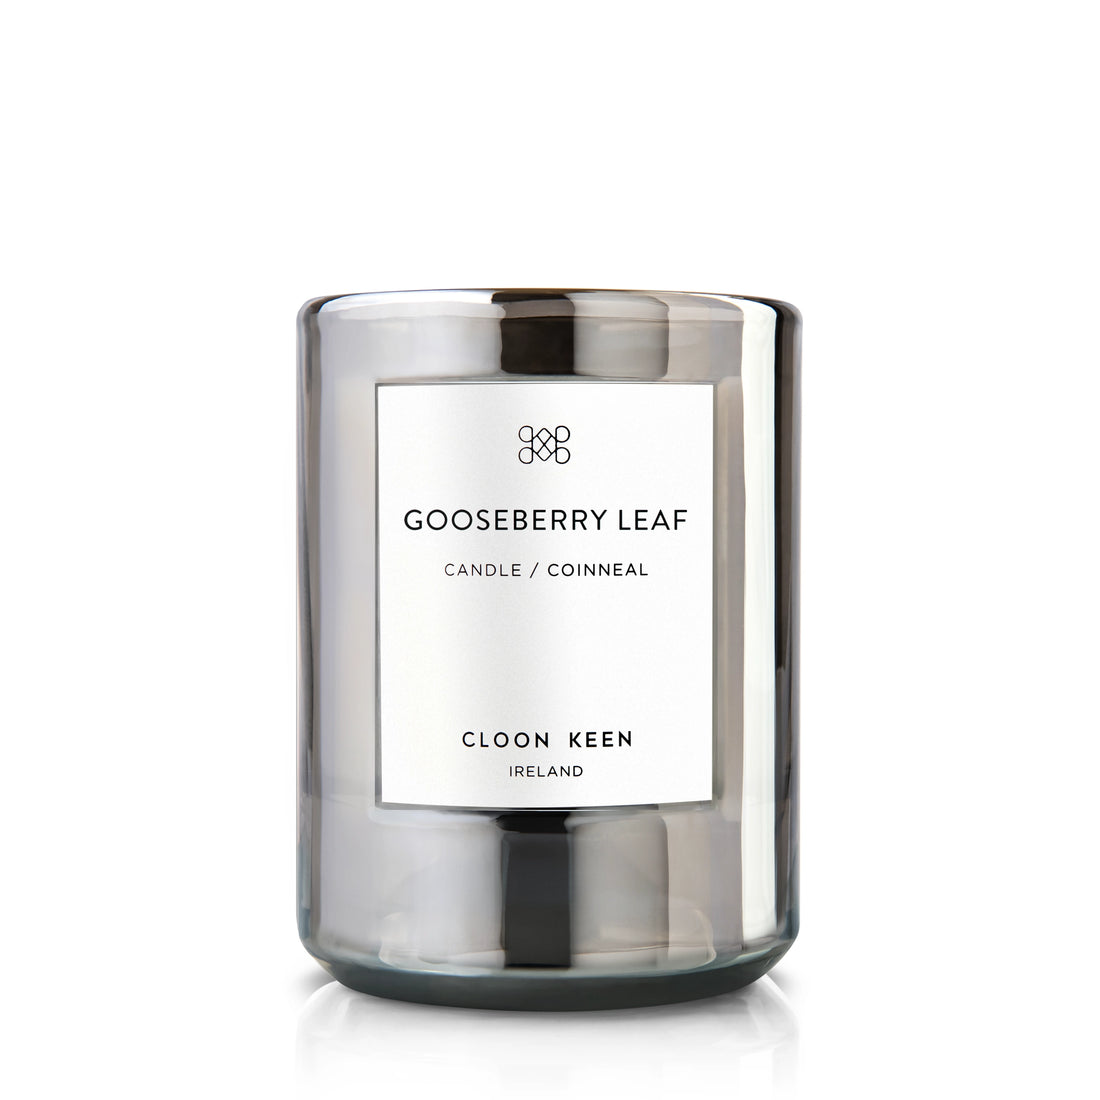 Discover Cloon Keen Gooseberry Leaf candle. Ripe gooseberry currants enhanced with crisp citrus oils and a hint of hedgerow fruits. The herald of an Irish summer. 